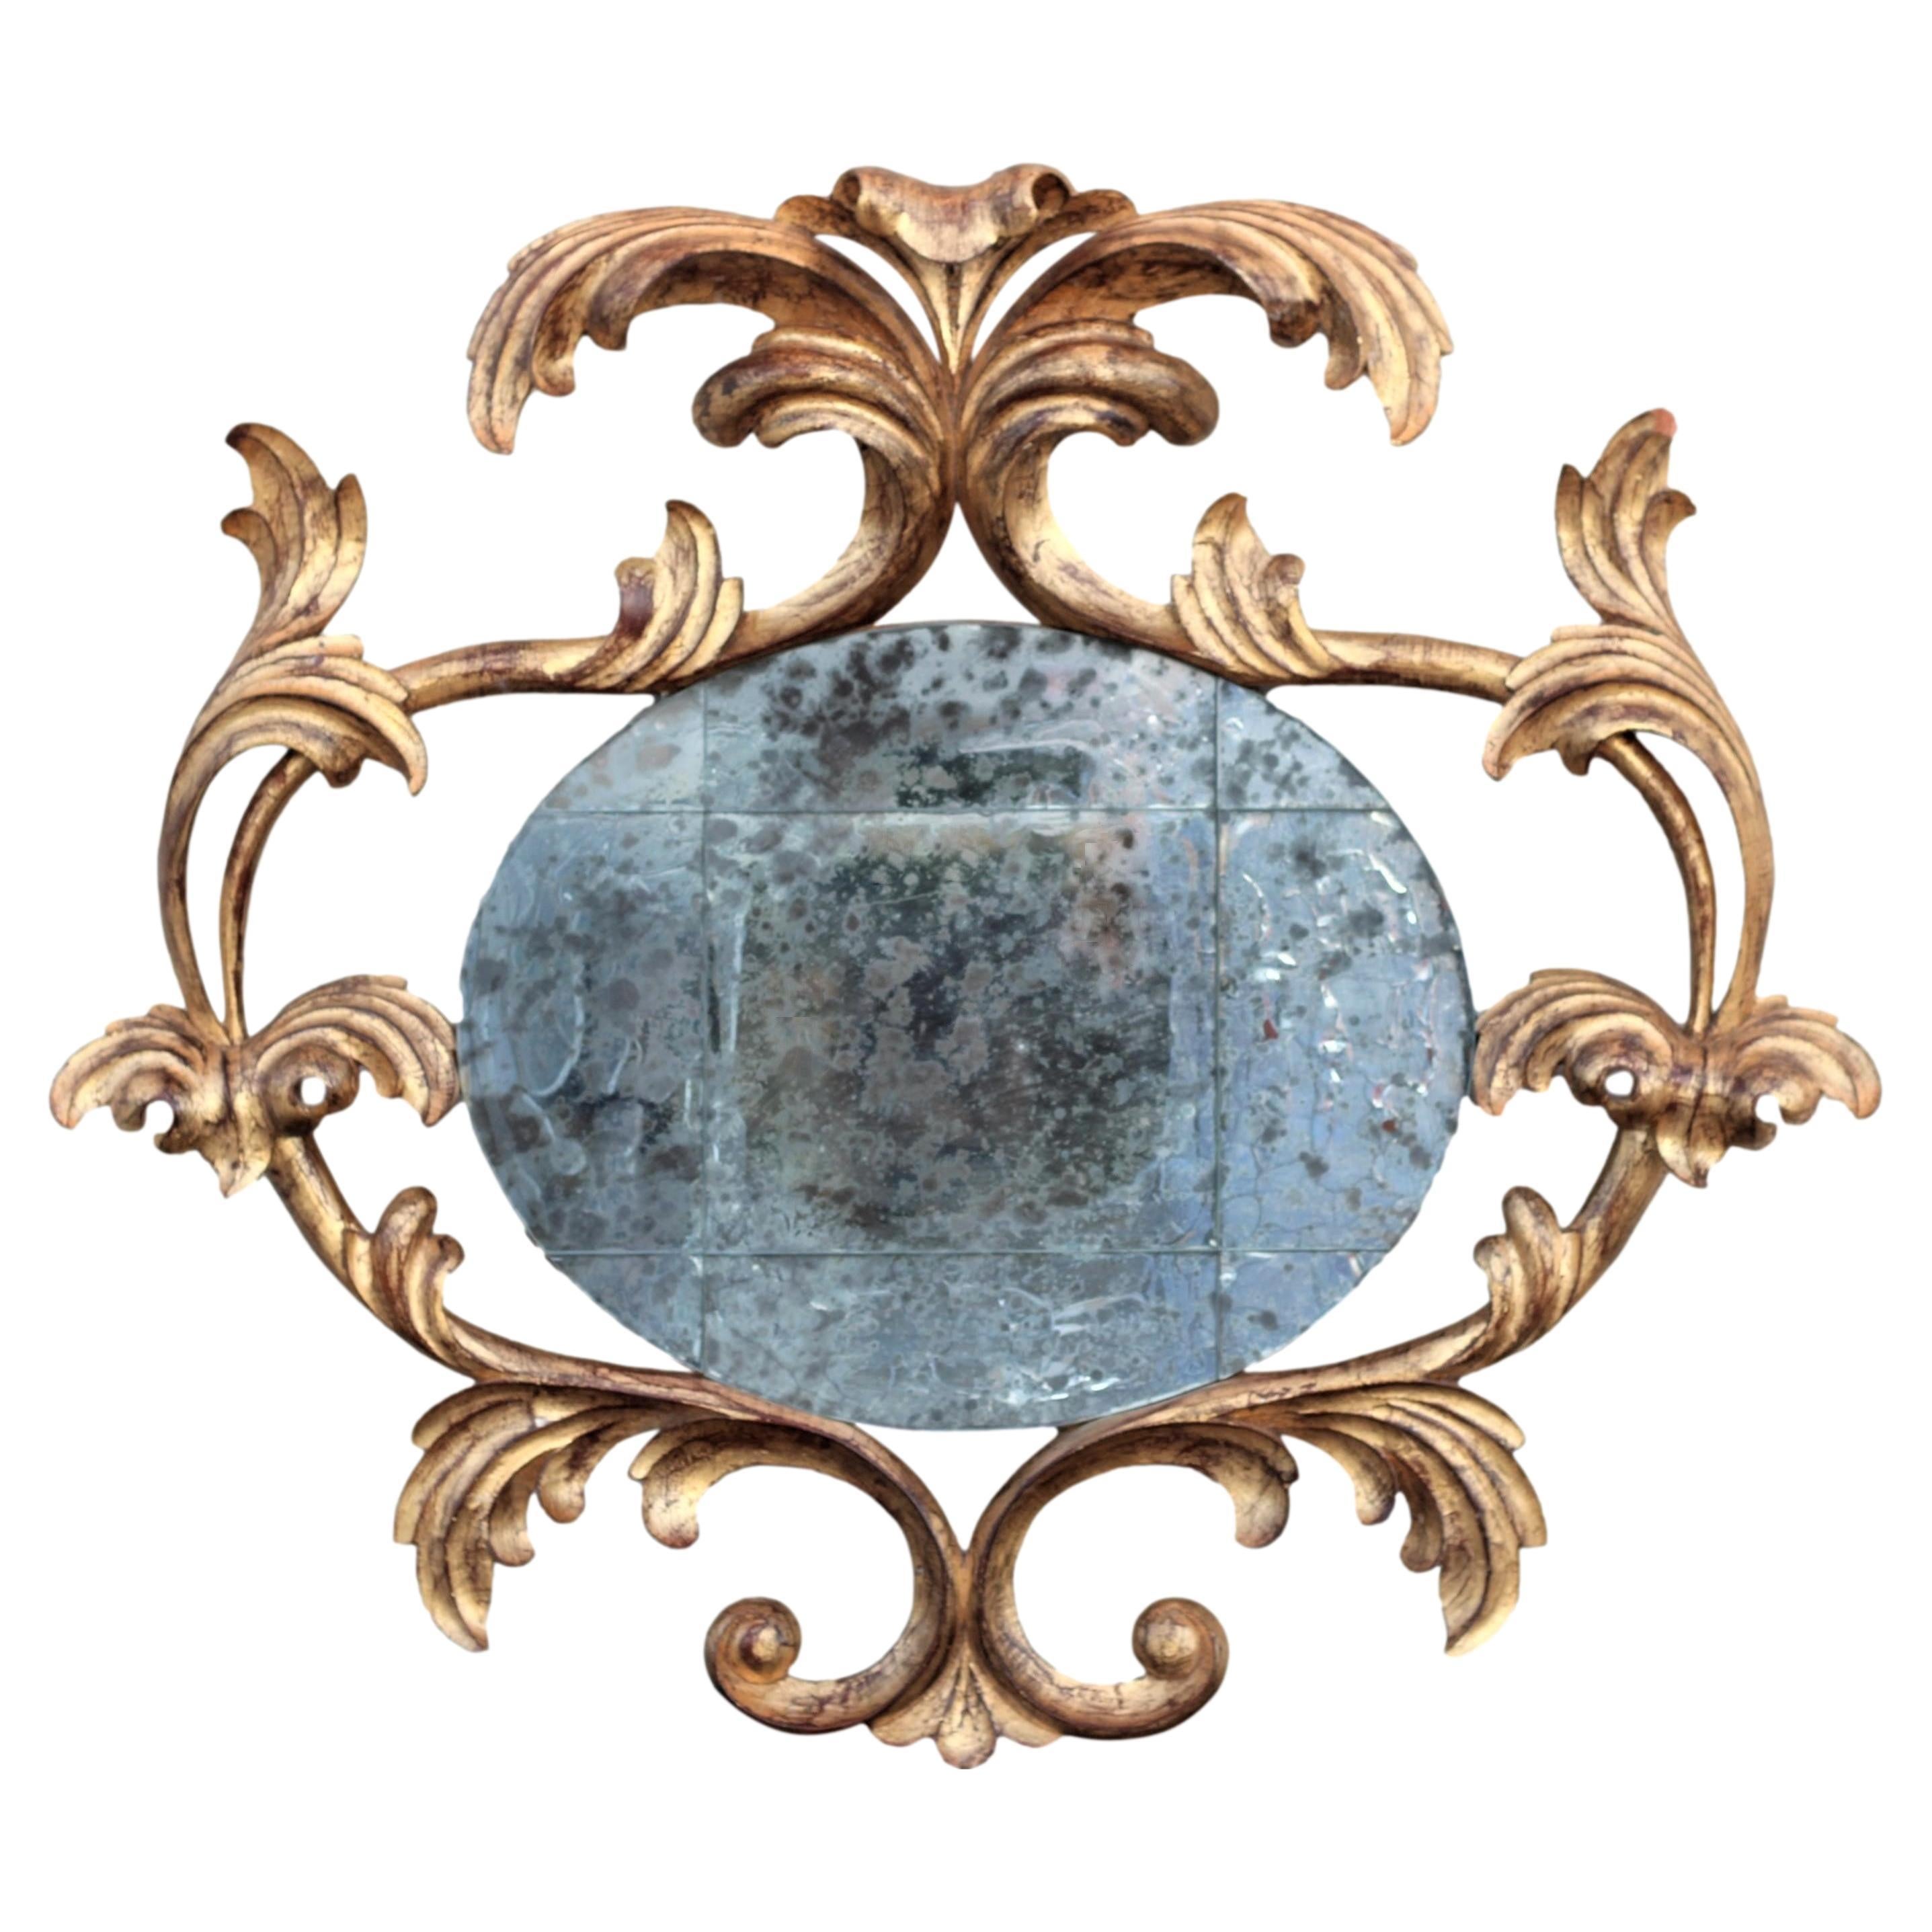 Harrison & Gil Carved Giltwood Rococo Mirror with Antiqued Distressed Glass